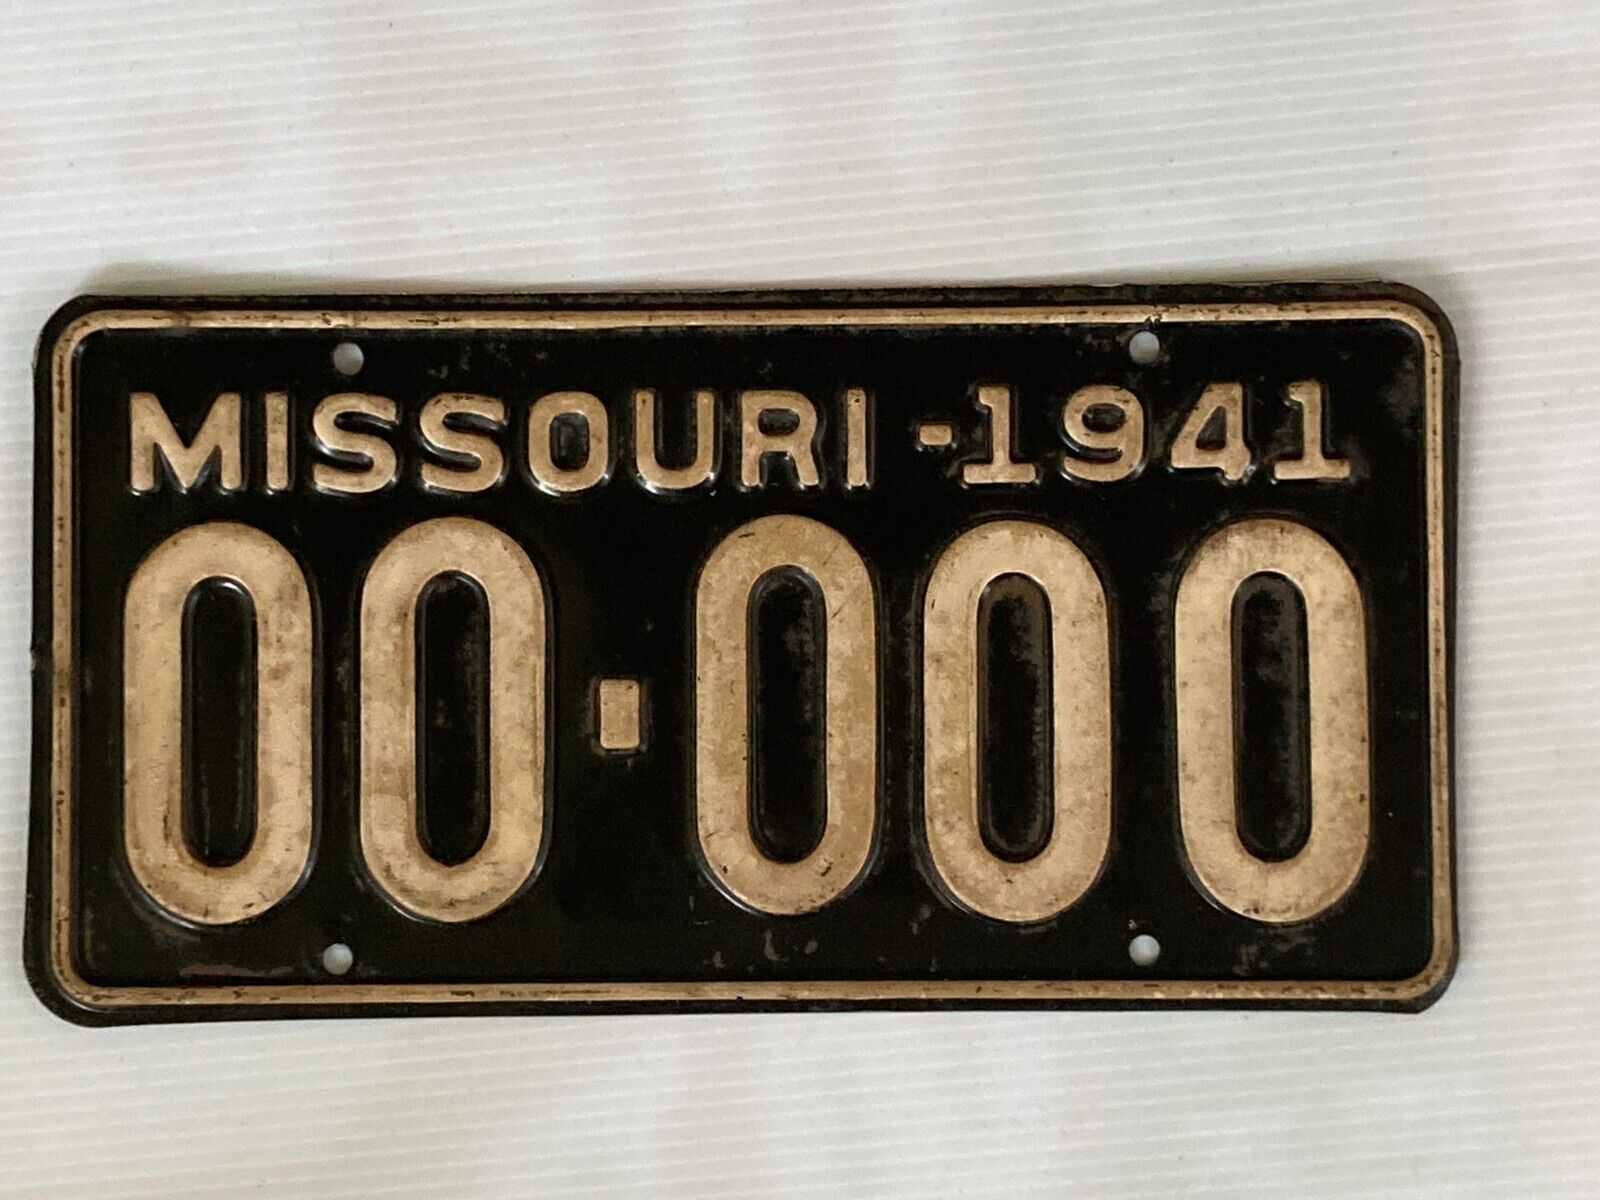 VERY RARE MISSOURI 1941 SAMPLE PLATE Official Issue Man Cave DECOR Dad\'s Garage